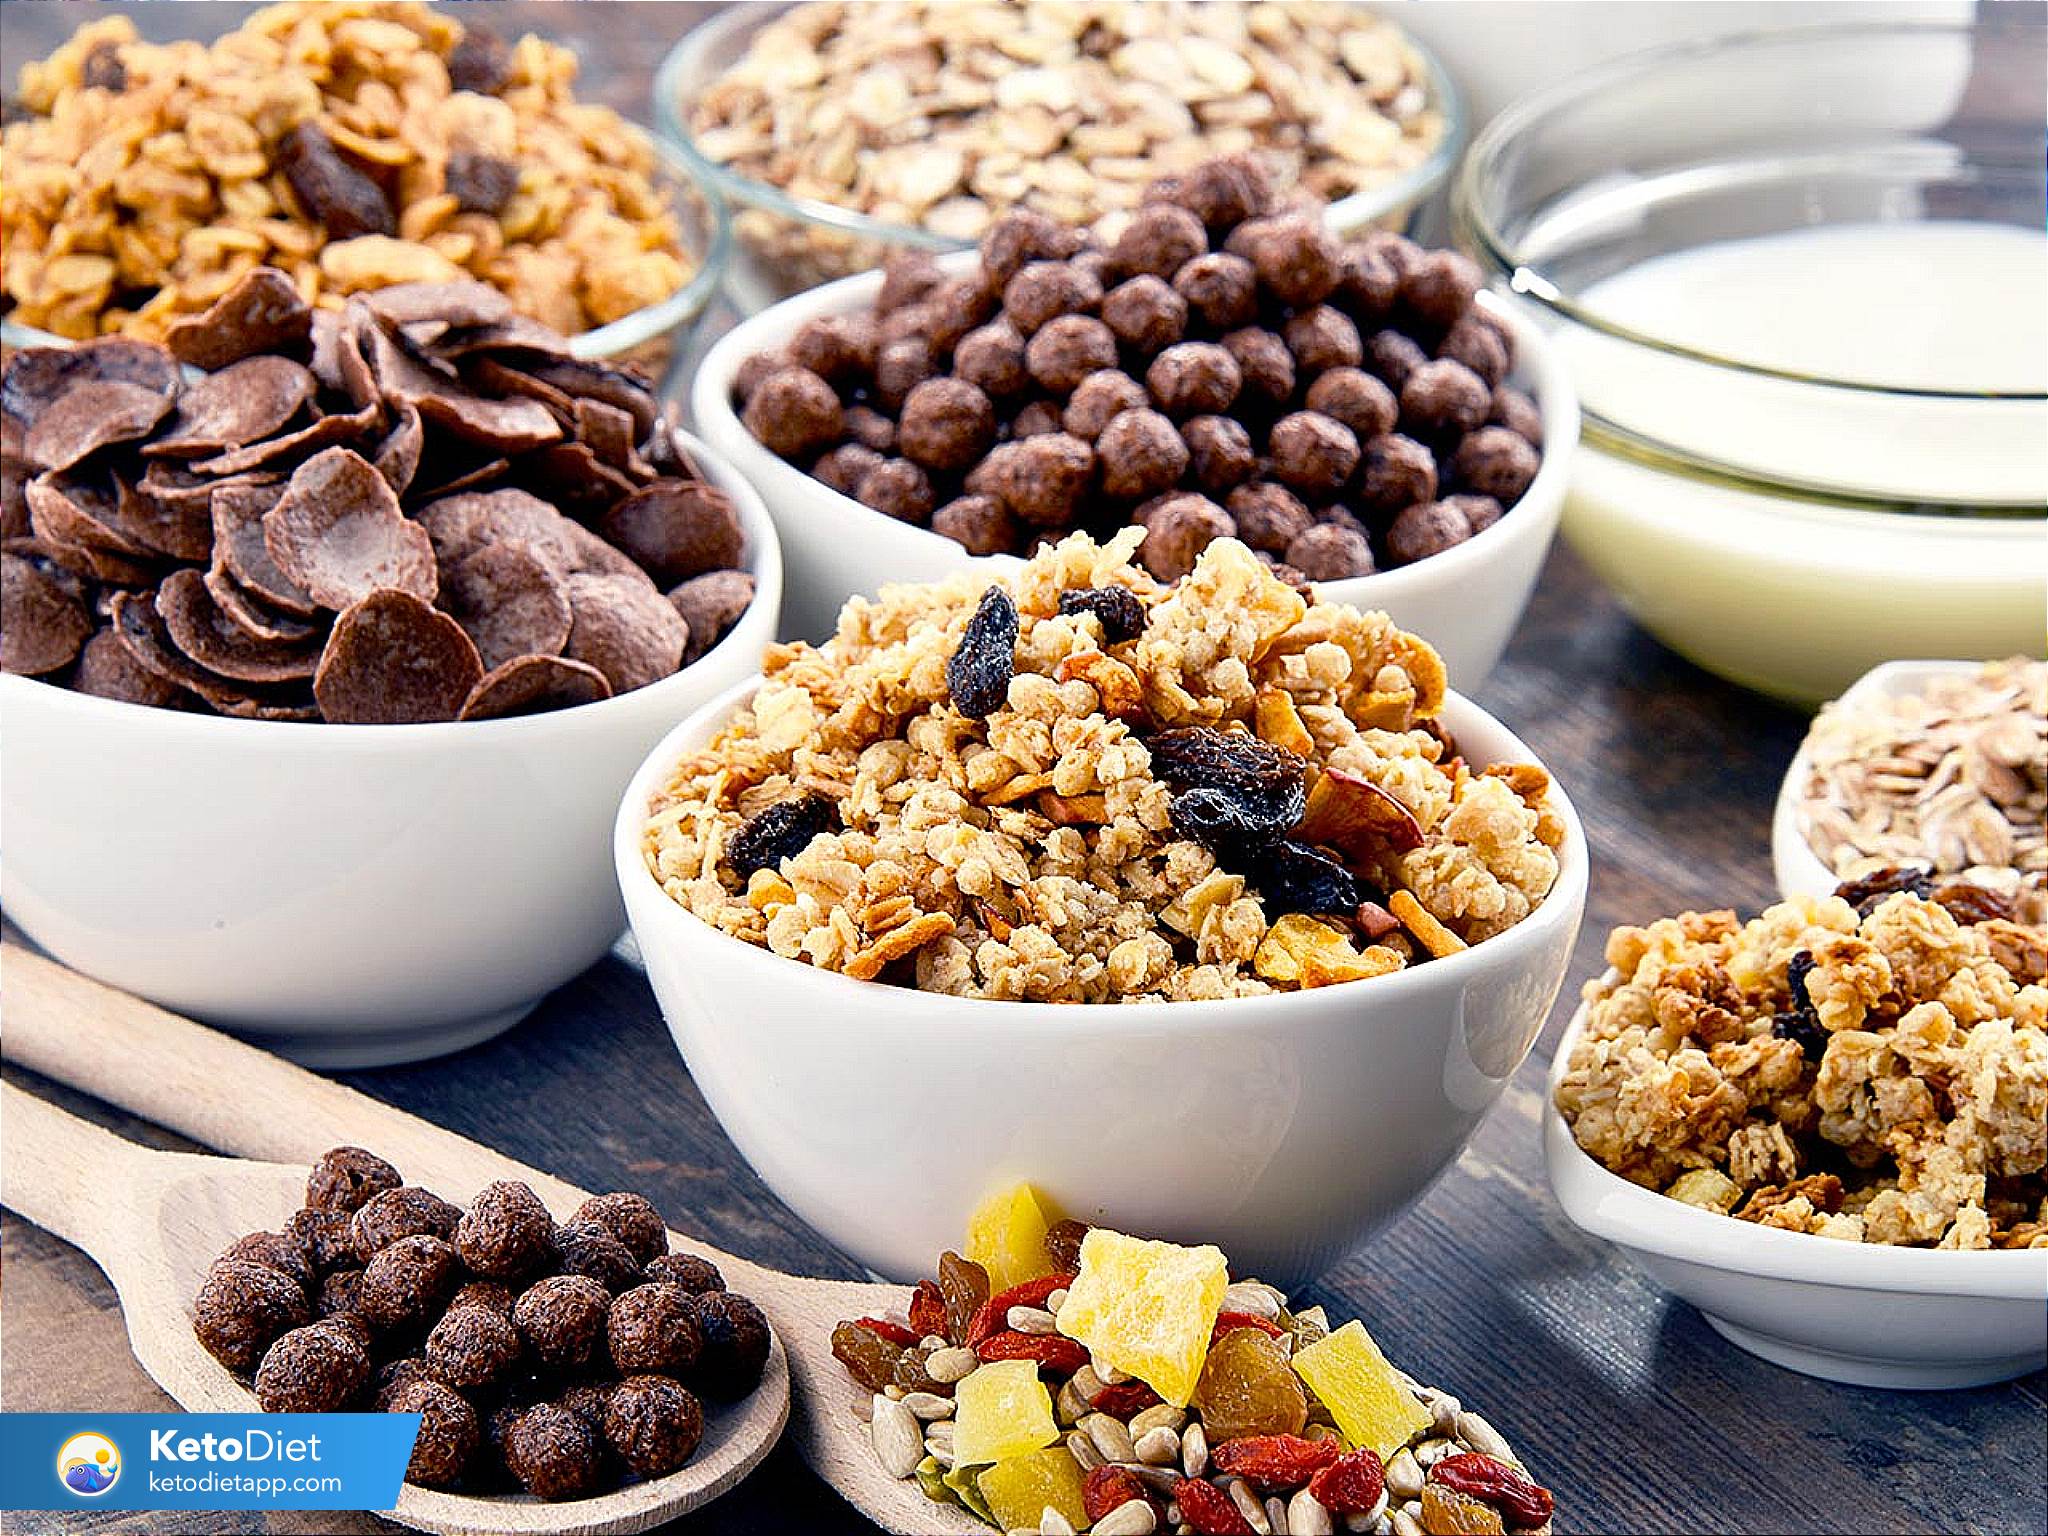 https://ketodietapp.com/Blog/lchf-soc/goodbye-sugary-cereals-low-carb-cereal-alternatives-that-will-revolutionize-your-morning-routine-B7C26D40.jpg